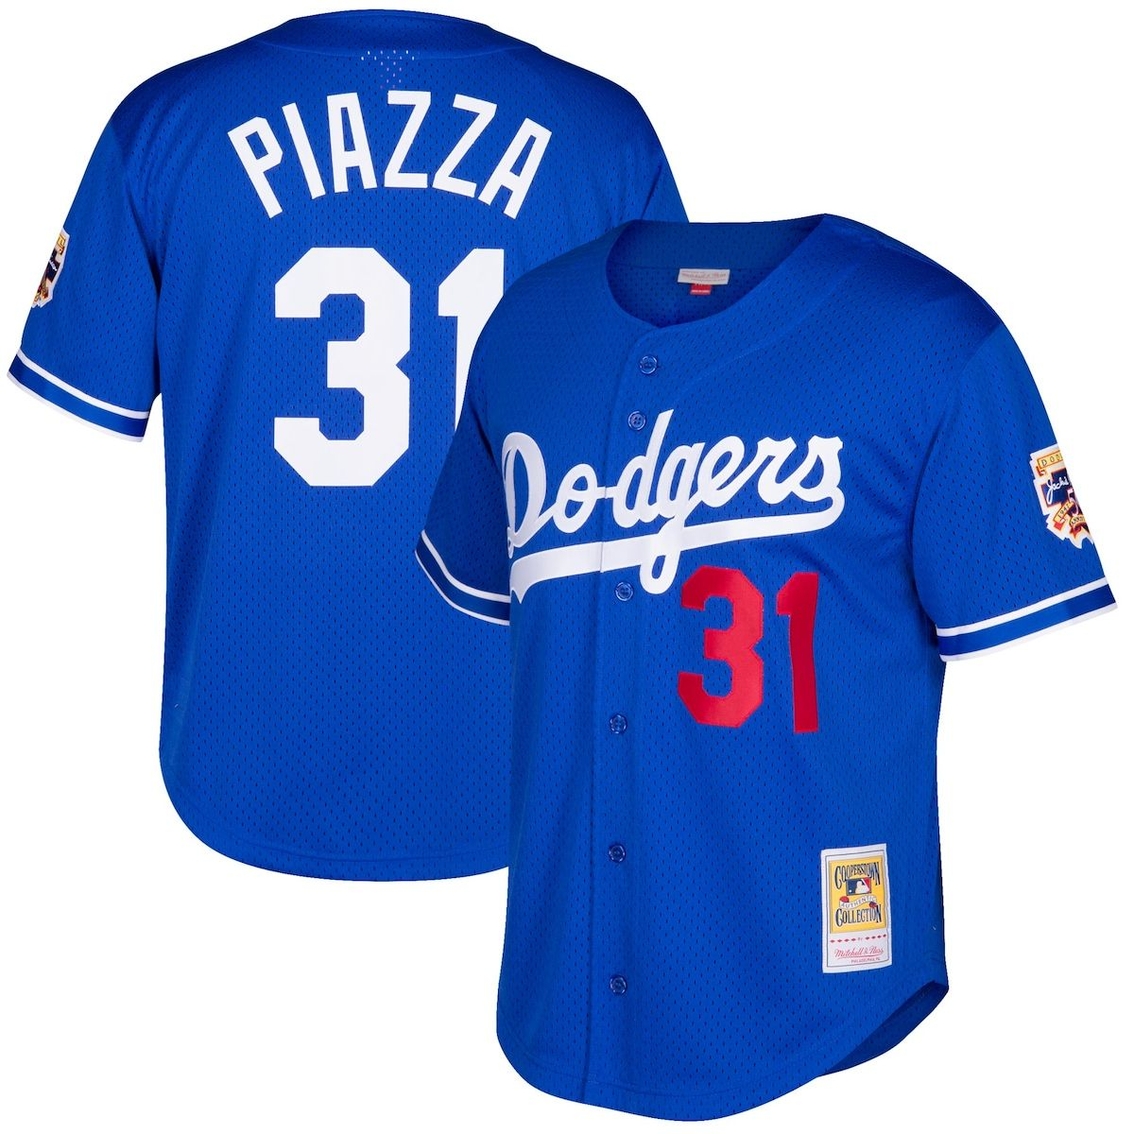 Mitchell & Ness Men's Mike Piazza Royal Los Angeles Dodgers Cooperstown Collection Mesh Batting Practice Button-Up Jersey - Image 2 of 4